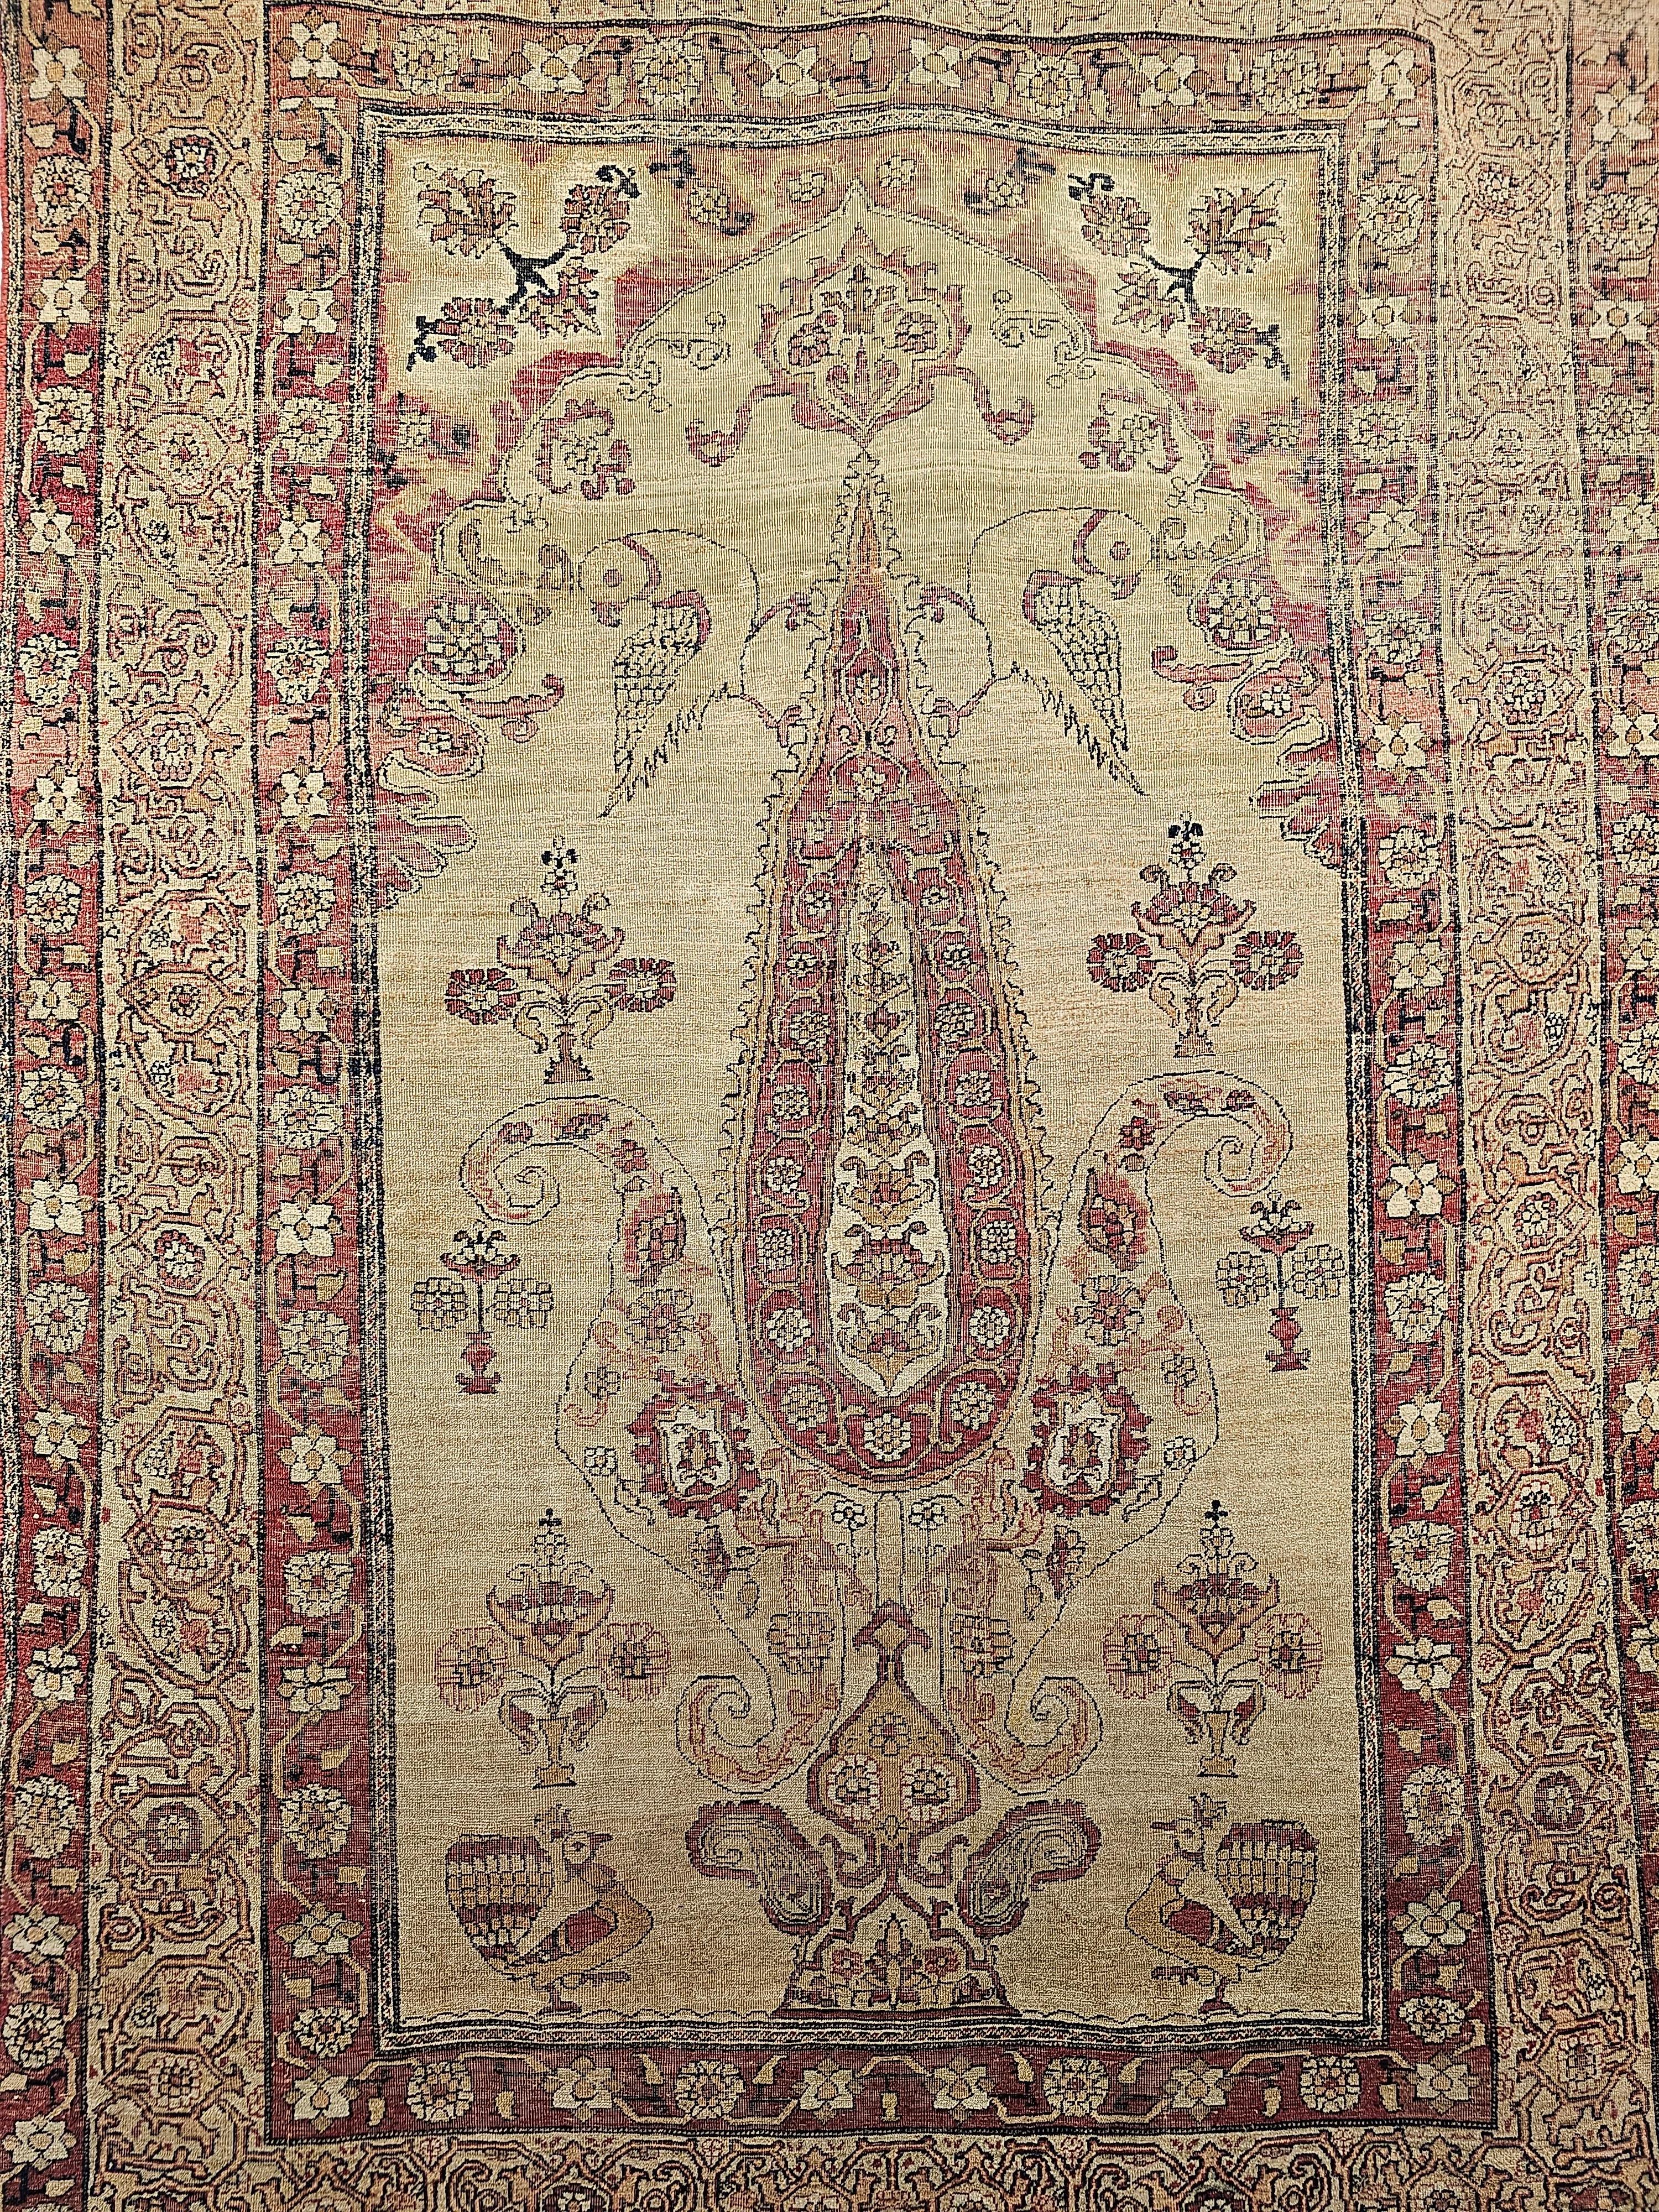 A beautiful Persian Kerman Lavar pictorial area rug with the “Tree of Life” design from the 4th quarter of the 1800s.  The main field is light tan or camel with a central cypress tree with a beautiful magenta color flanked by birds (parrots) and